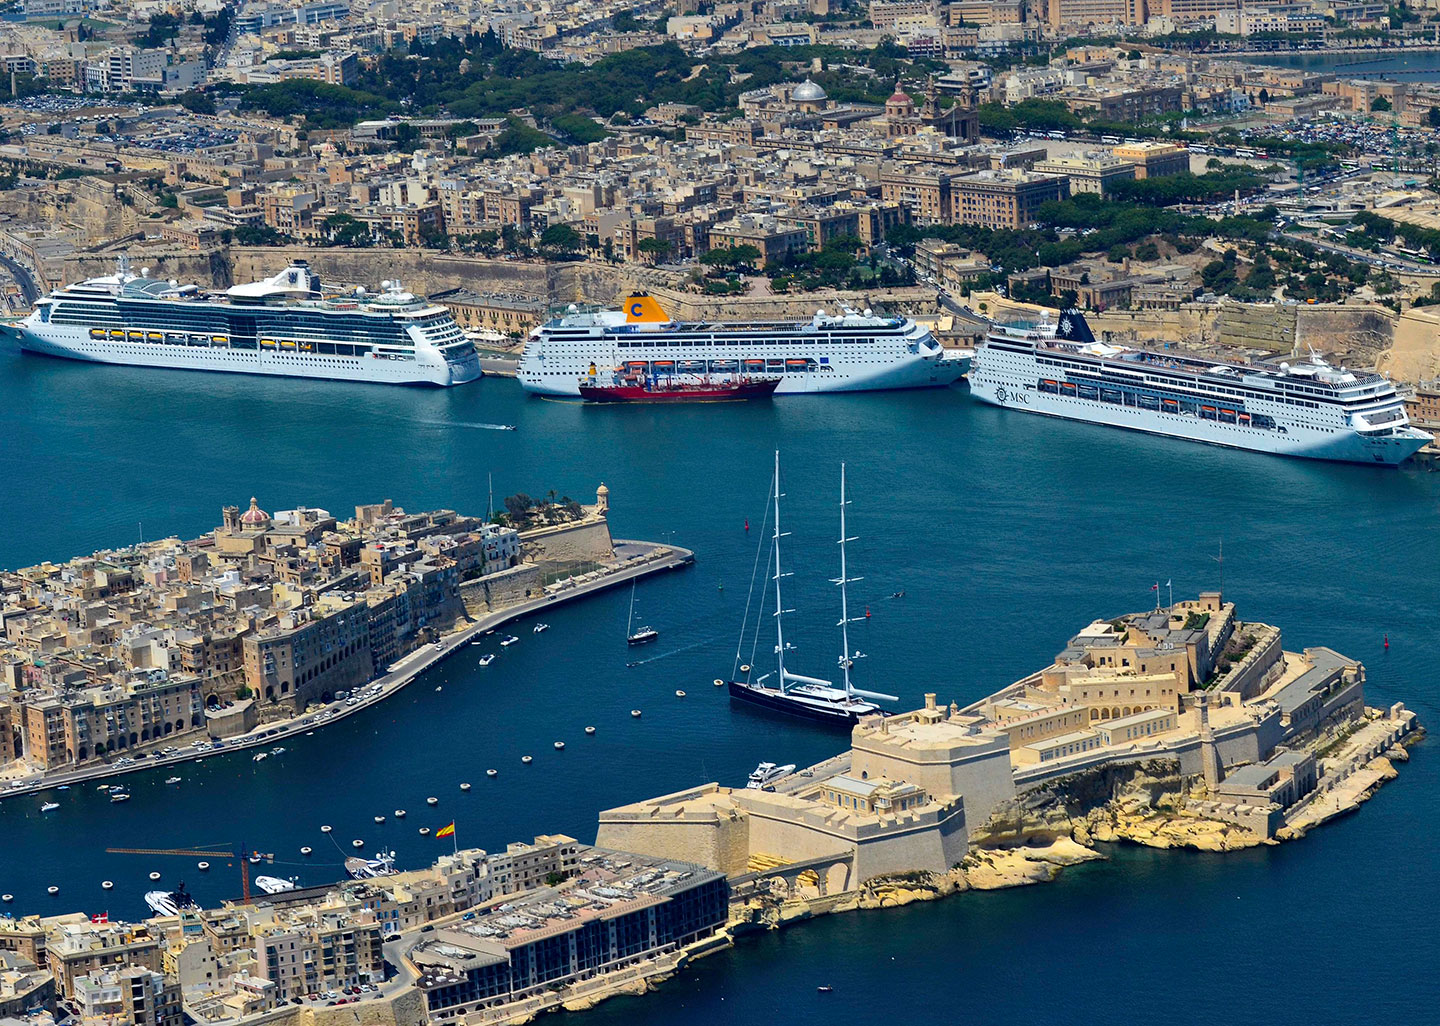 Valletta Cruise Port named as Top-Rated Mediterranean Cruise Destination